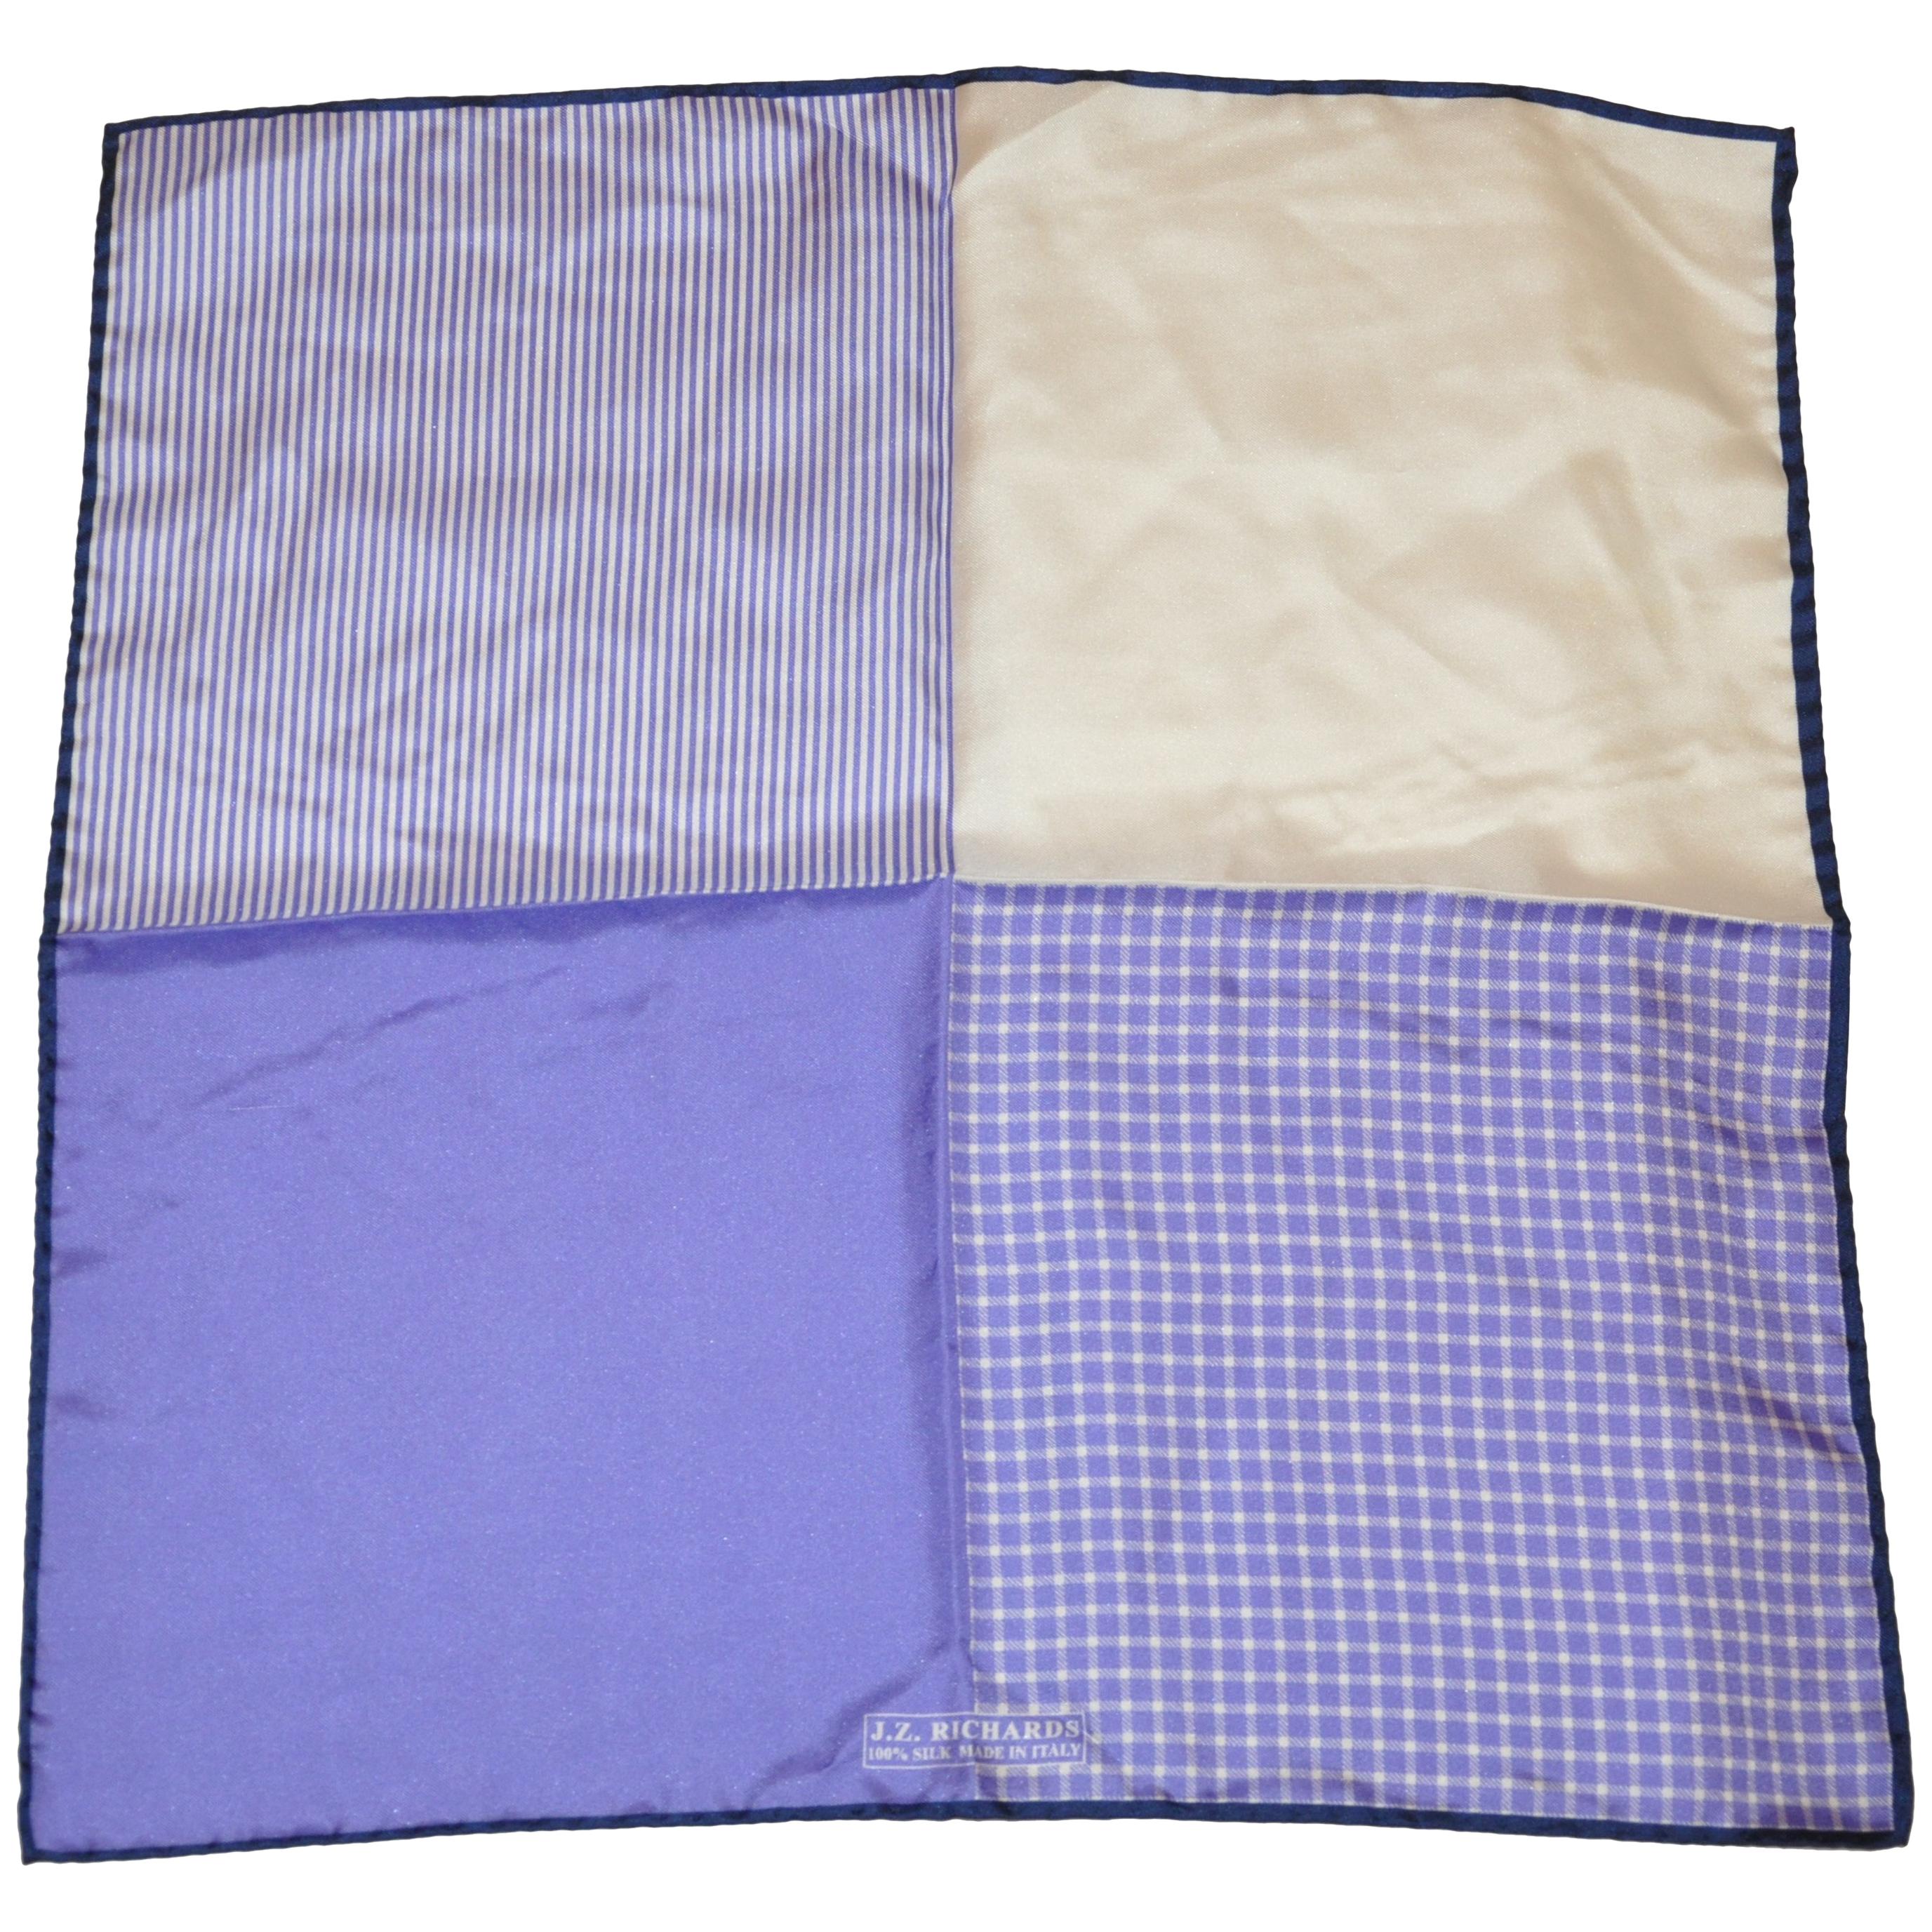 Shades of Lavender with Navy Border Silk Handkerchief For Sale